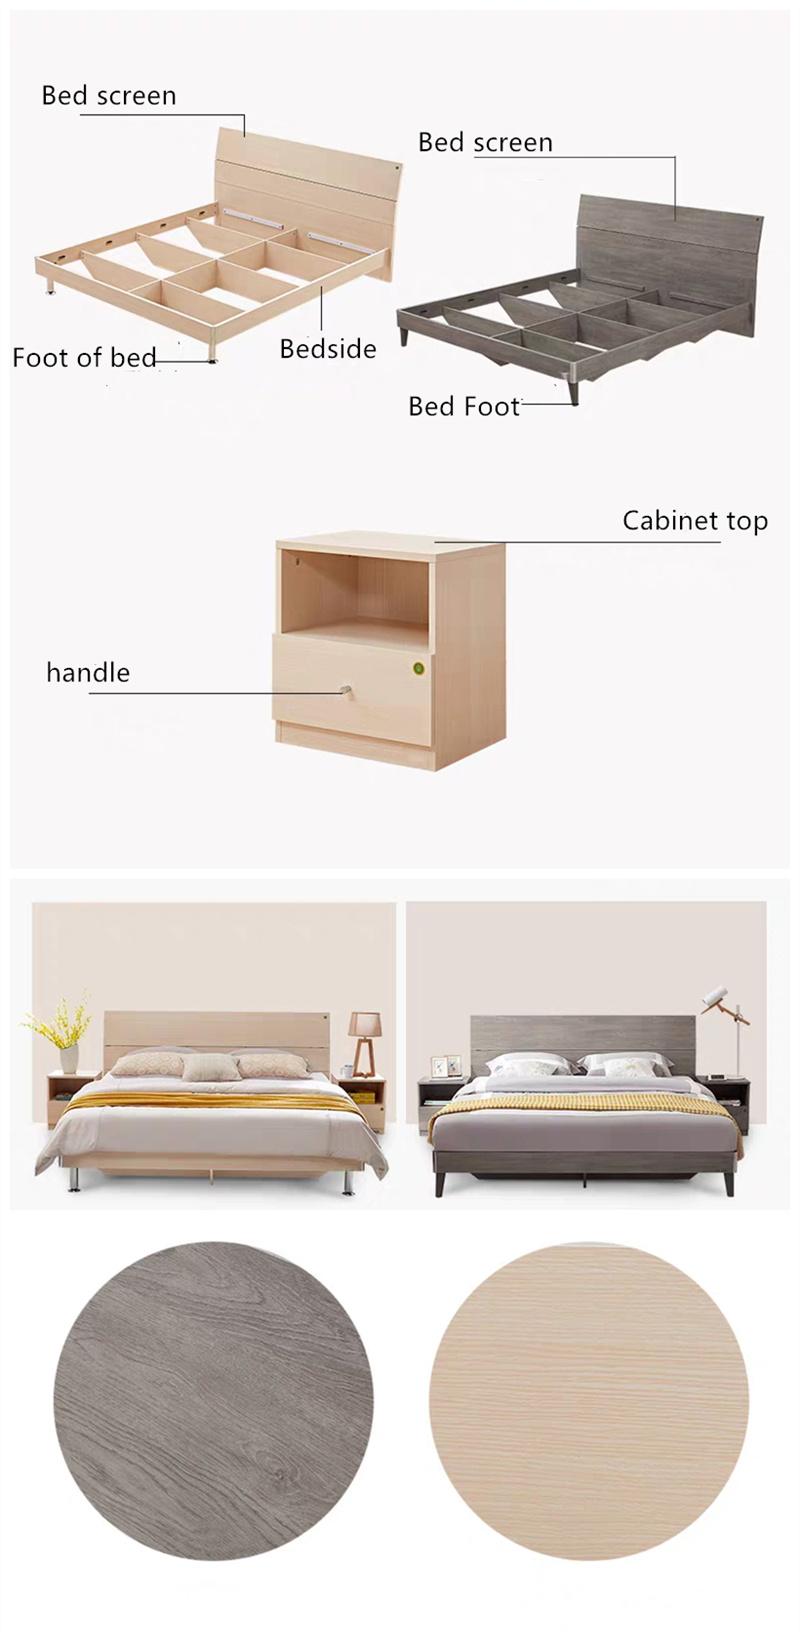 European Royal Classic Wood Carving French Furniture Classic Bedroom Furniture Bed